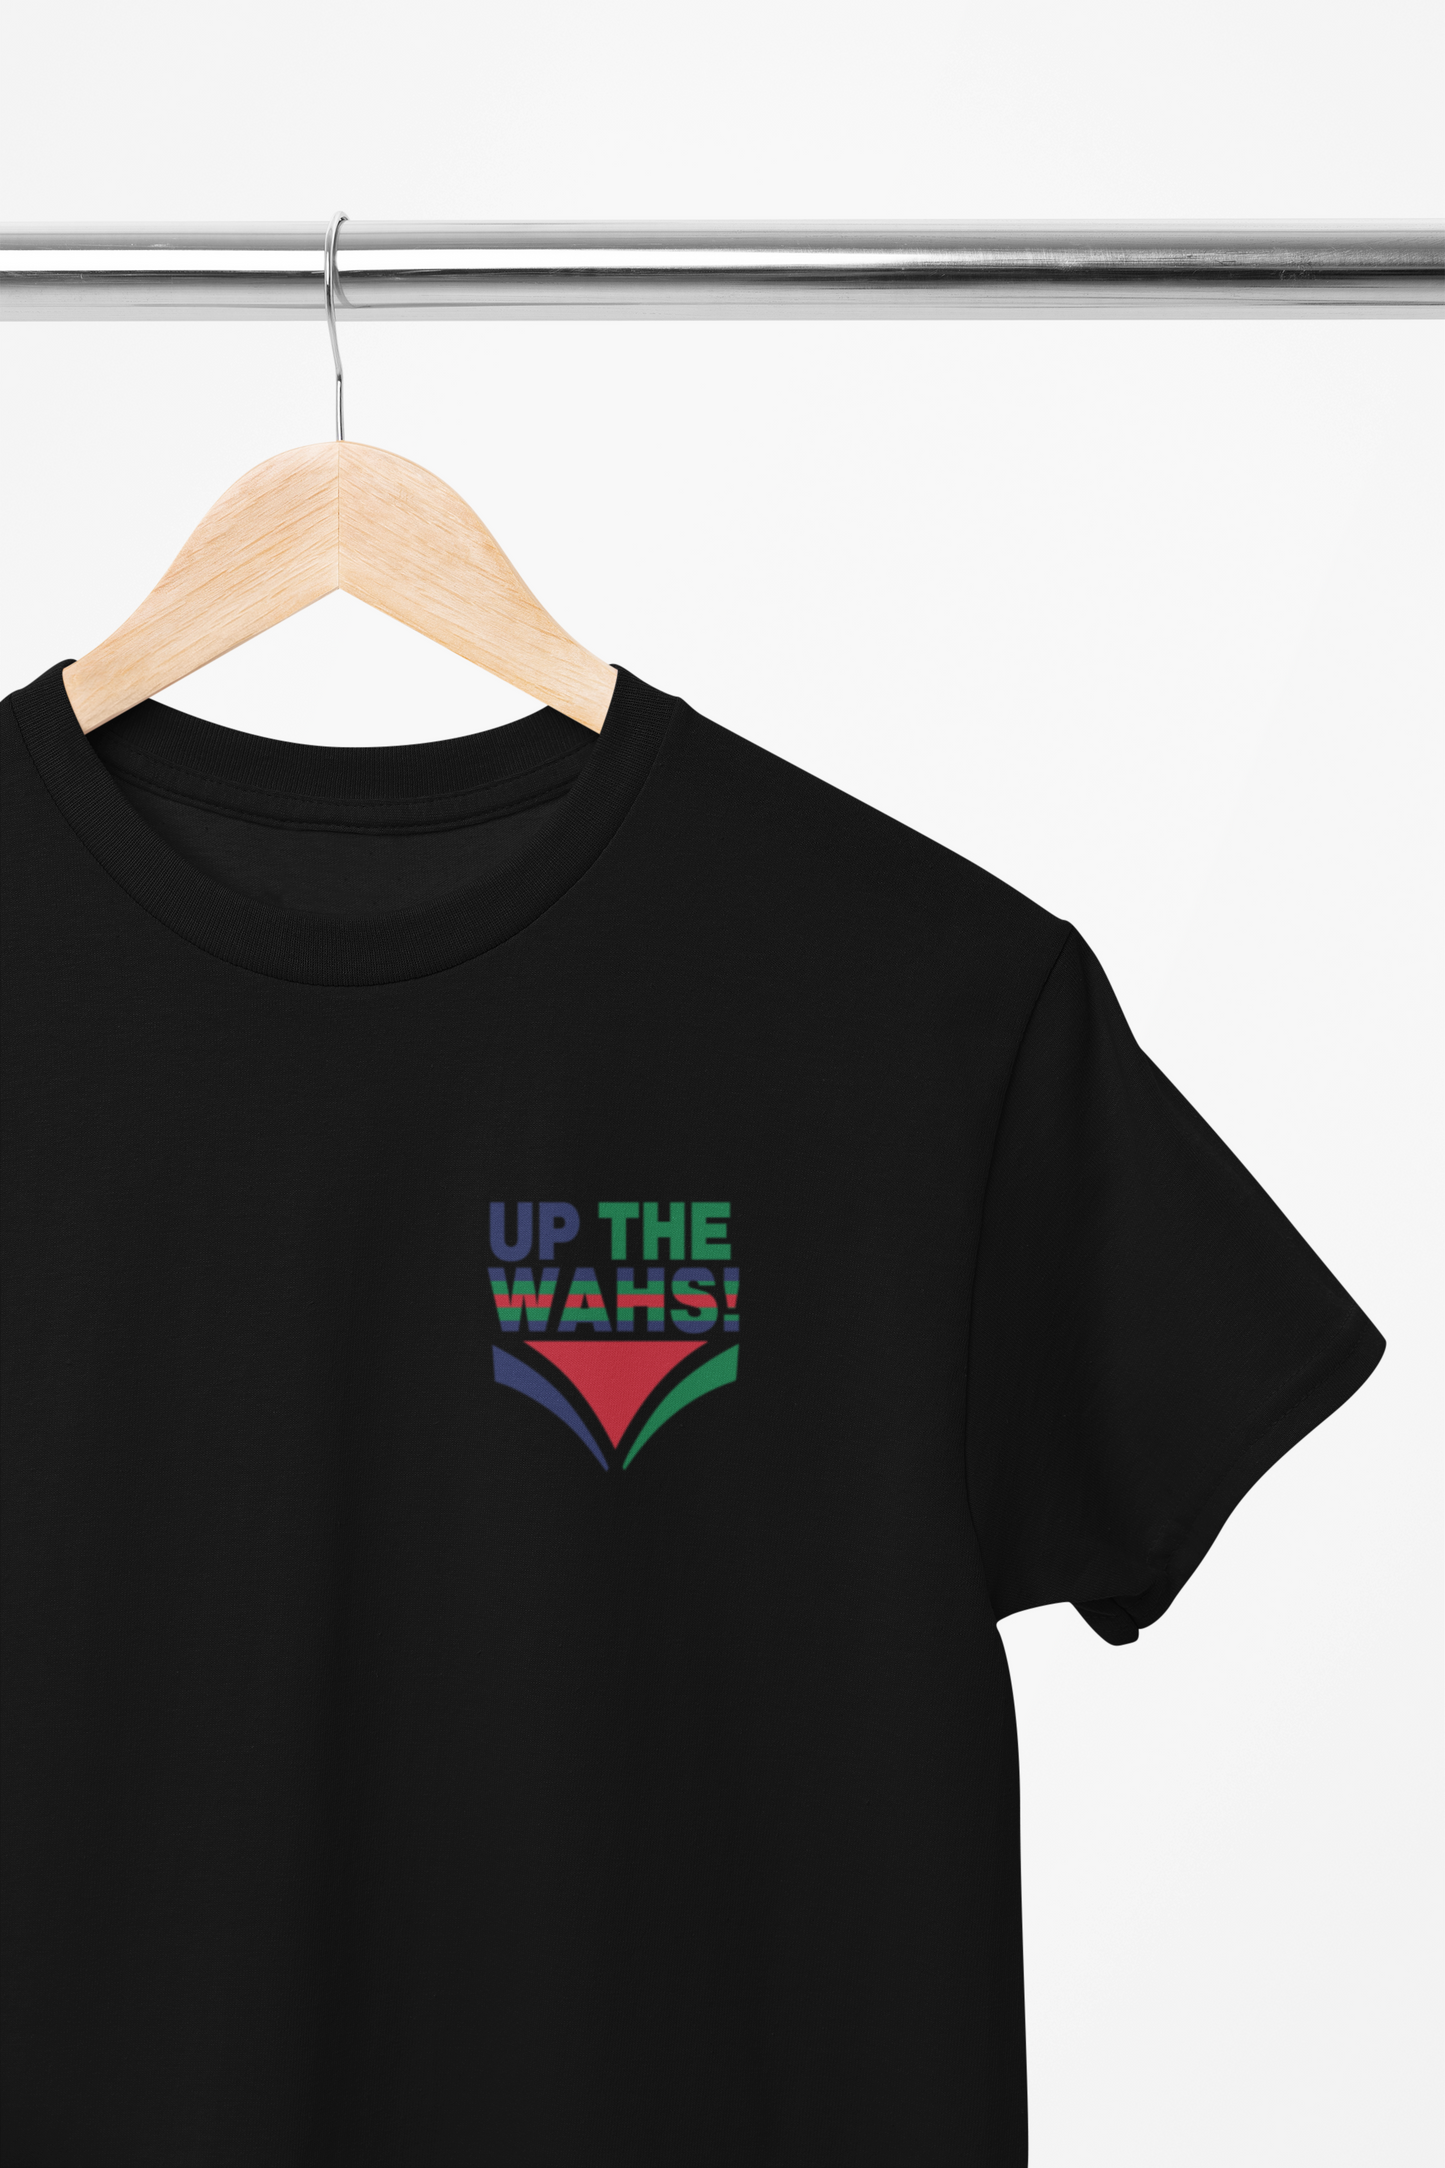 UP THE WAHS! Badge - Adult Tee